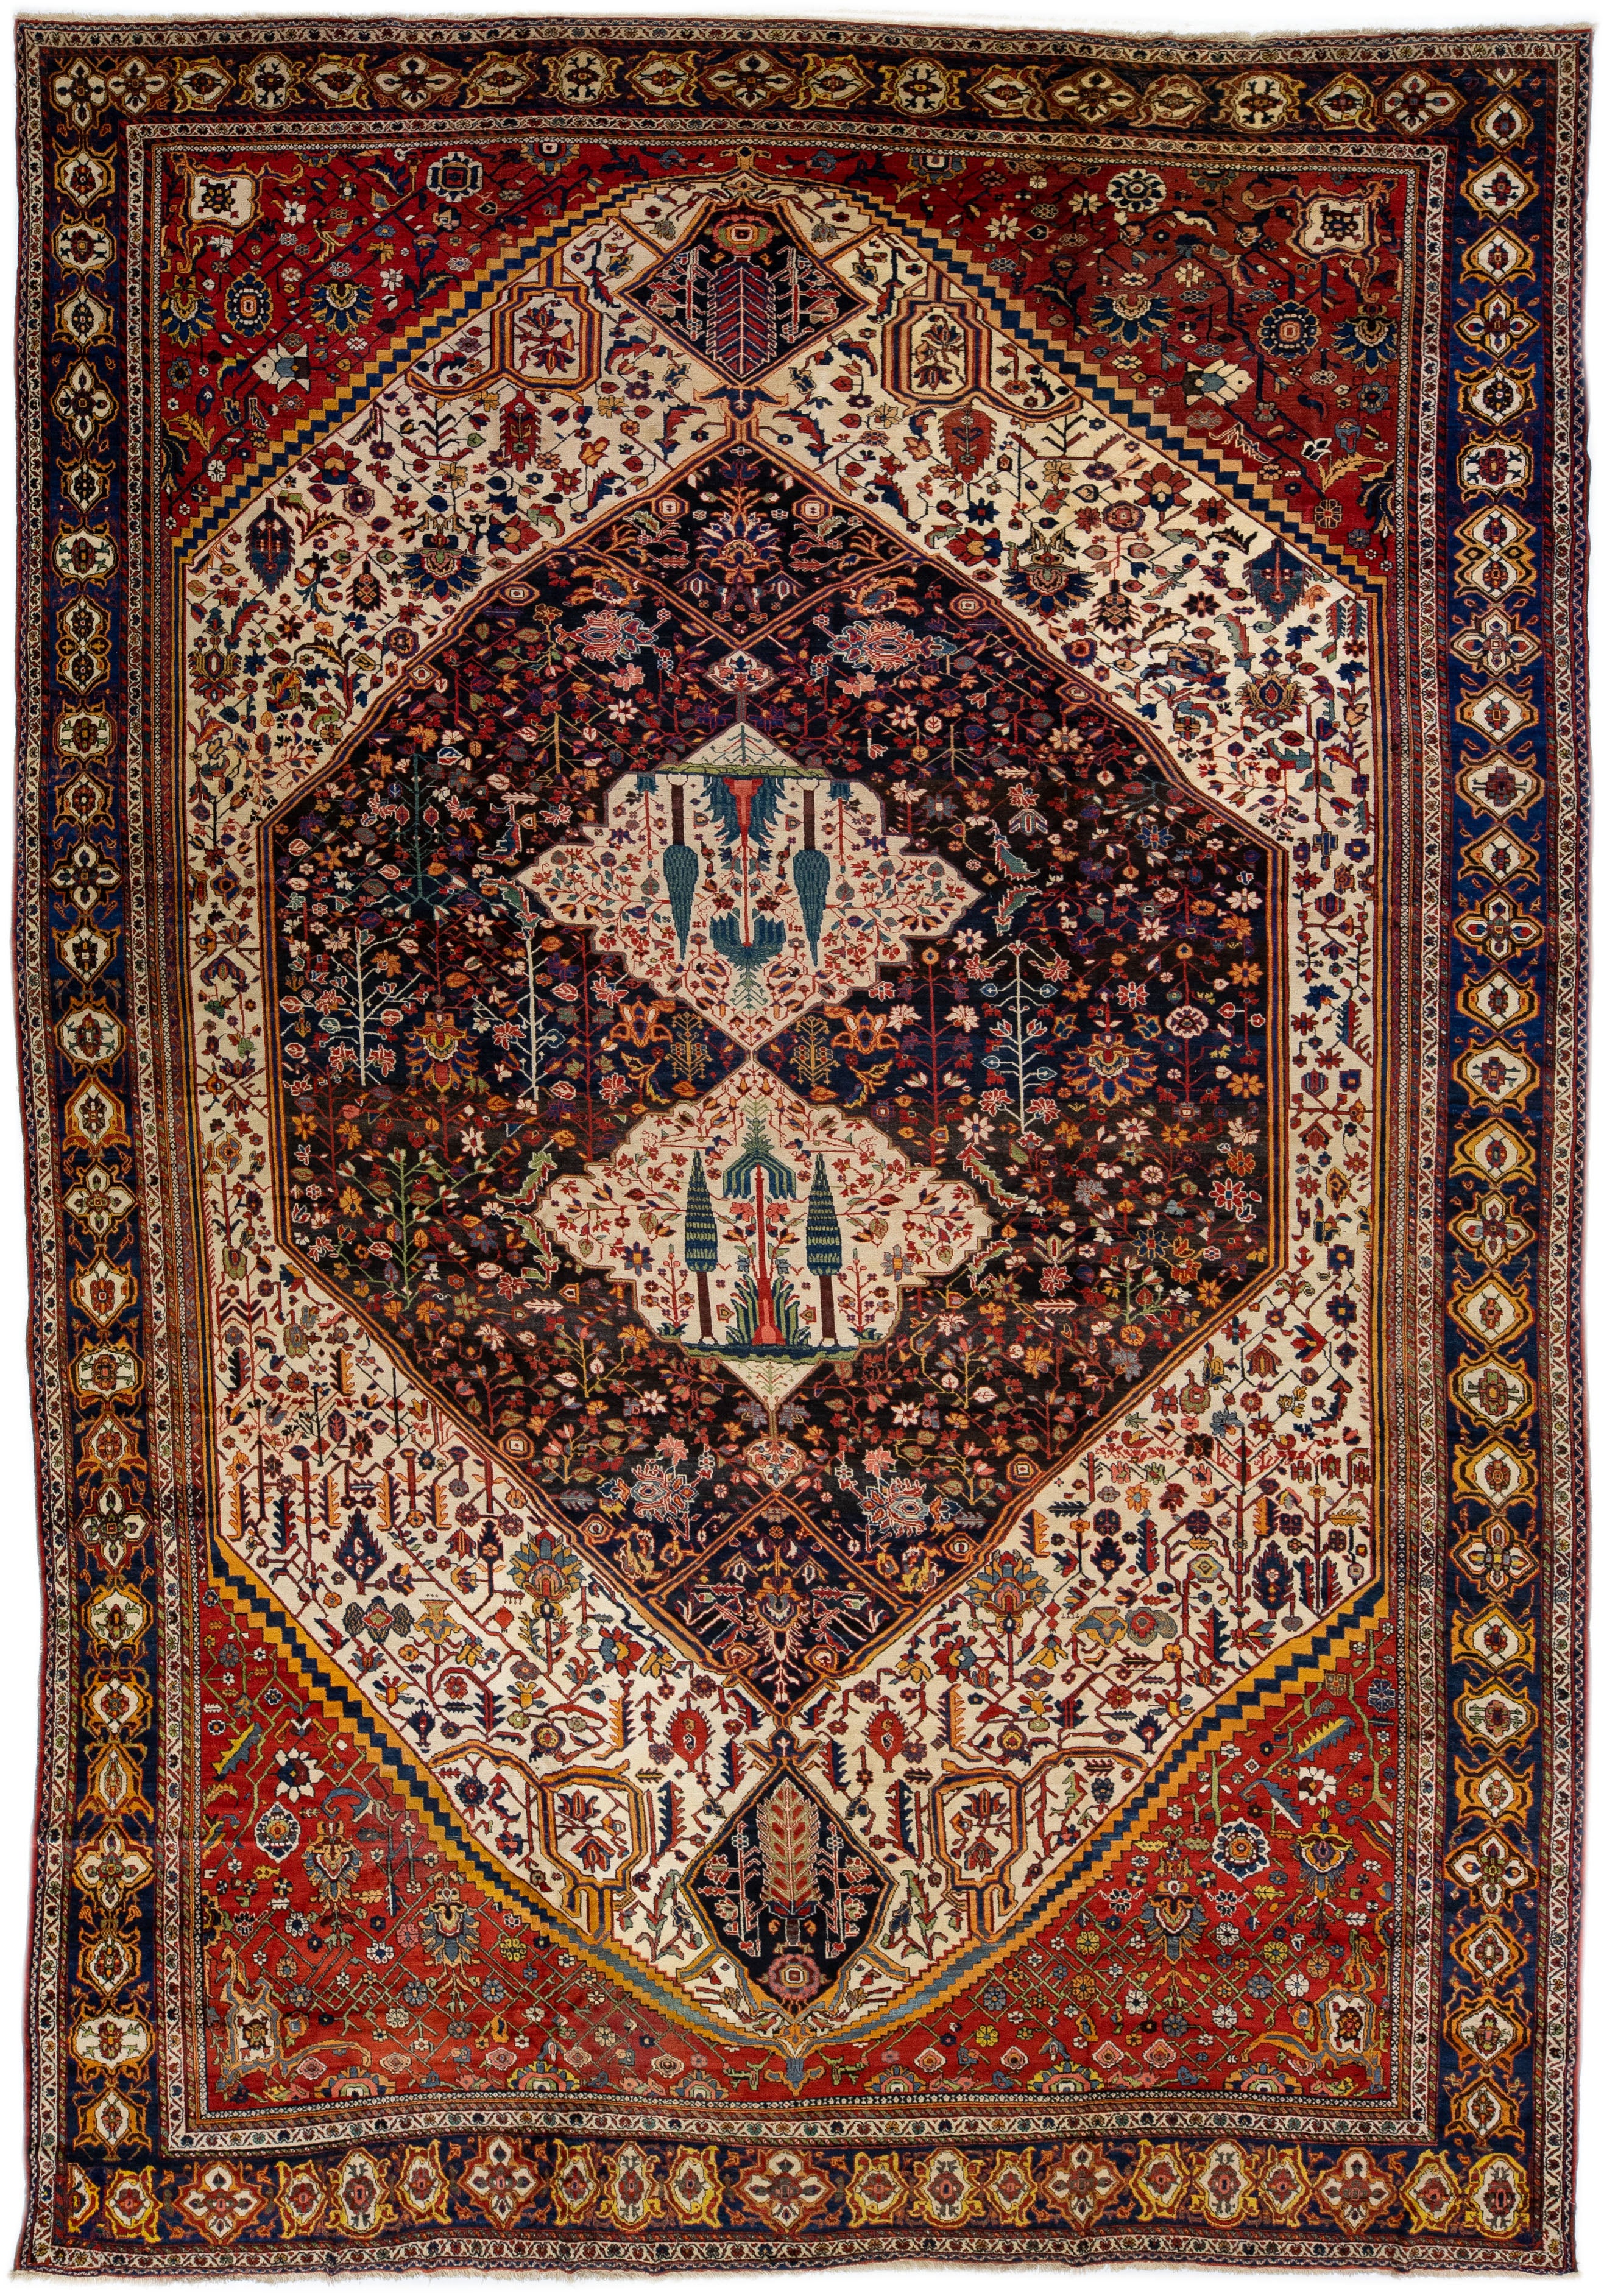 Antique Bakhtiari Persian Handmade Red and Blue Floral Oversize Wool Rug